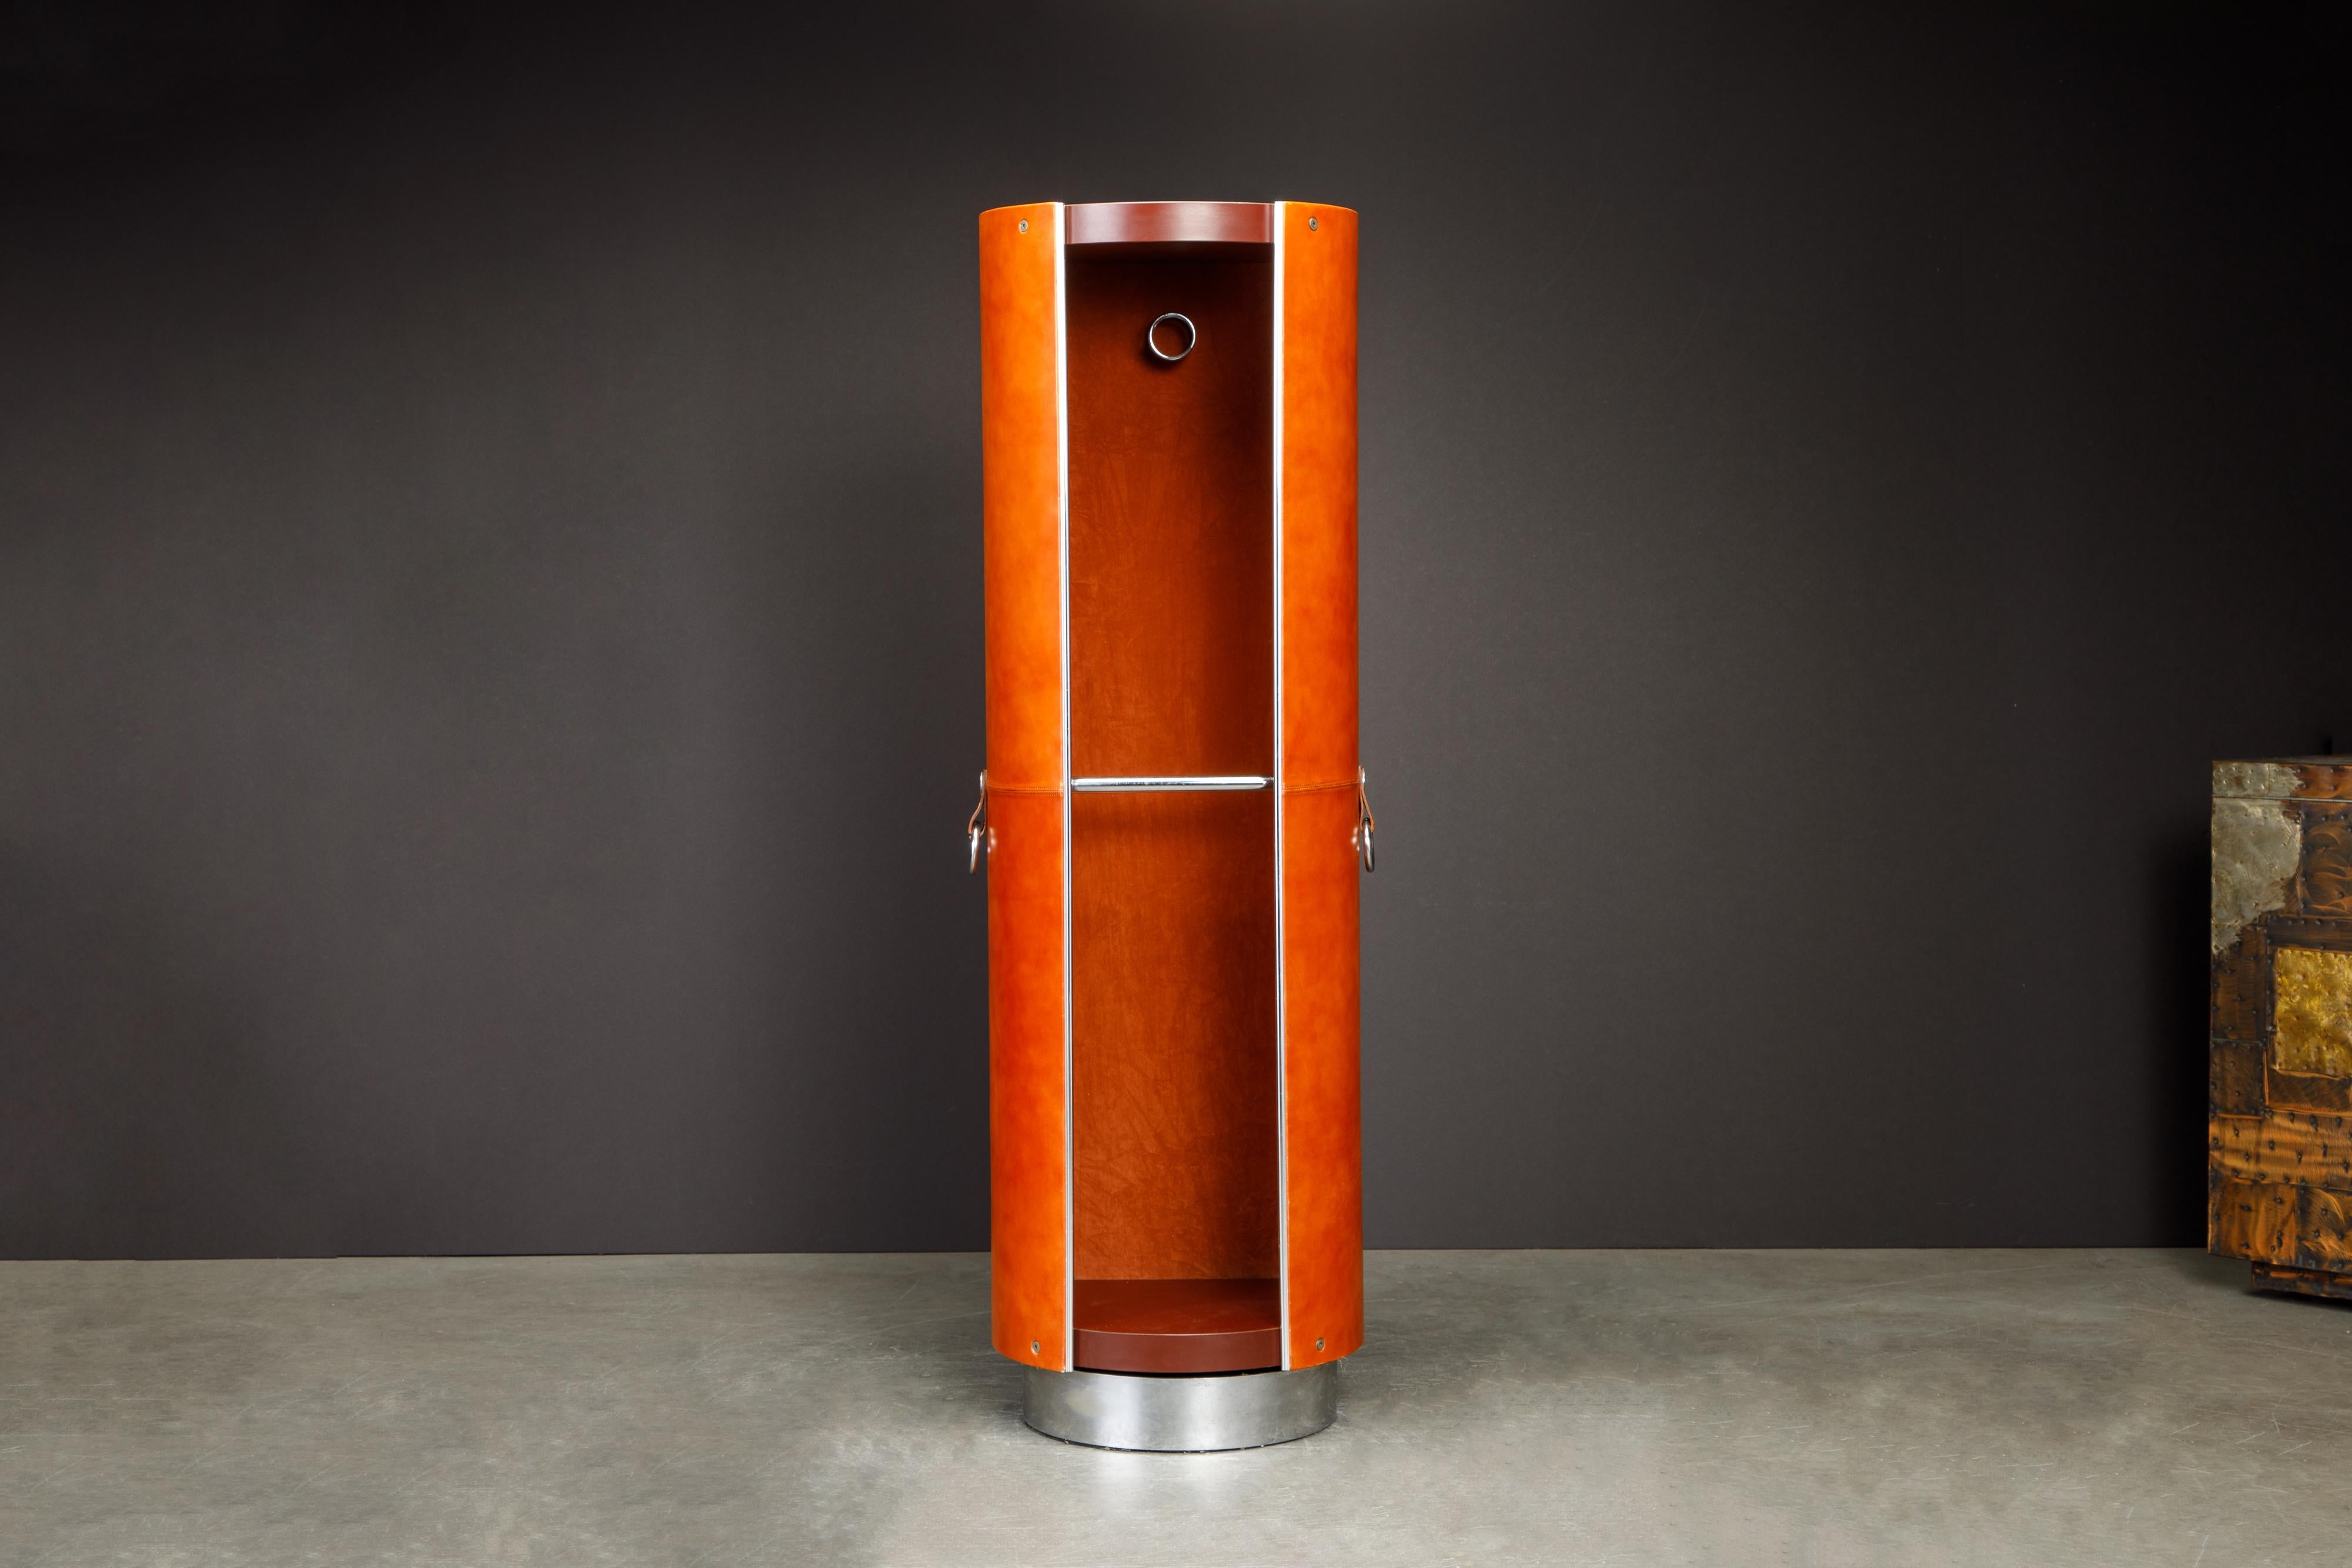 A rare coveted leather wardrobe cabinet by designer Guido Faleschini for Italian maker i4 Mariani, designed and produced in the 1970s for a short time along with a collection of iconic leather clad furniture rumored to have been retailed by Hermes.